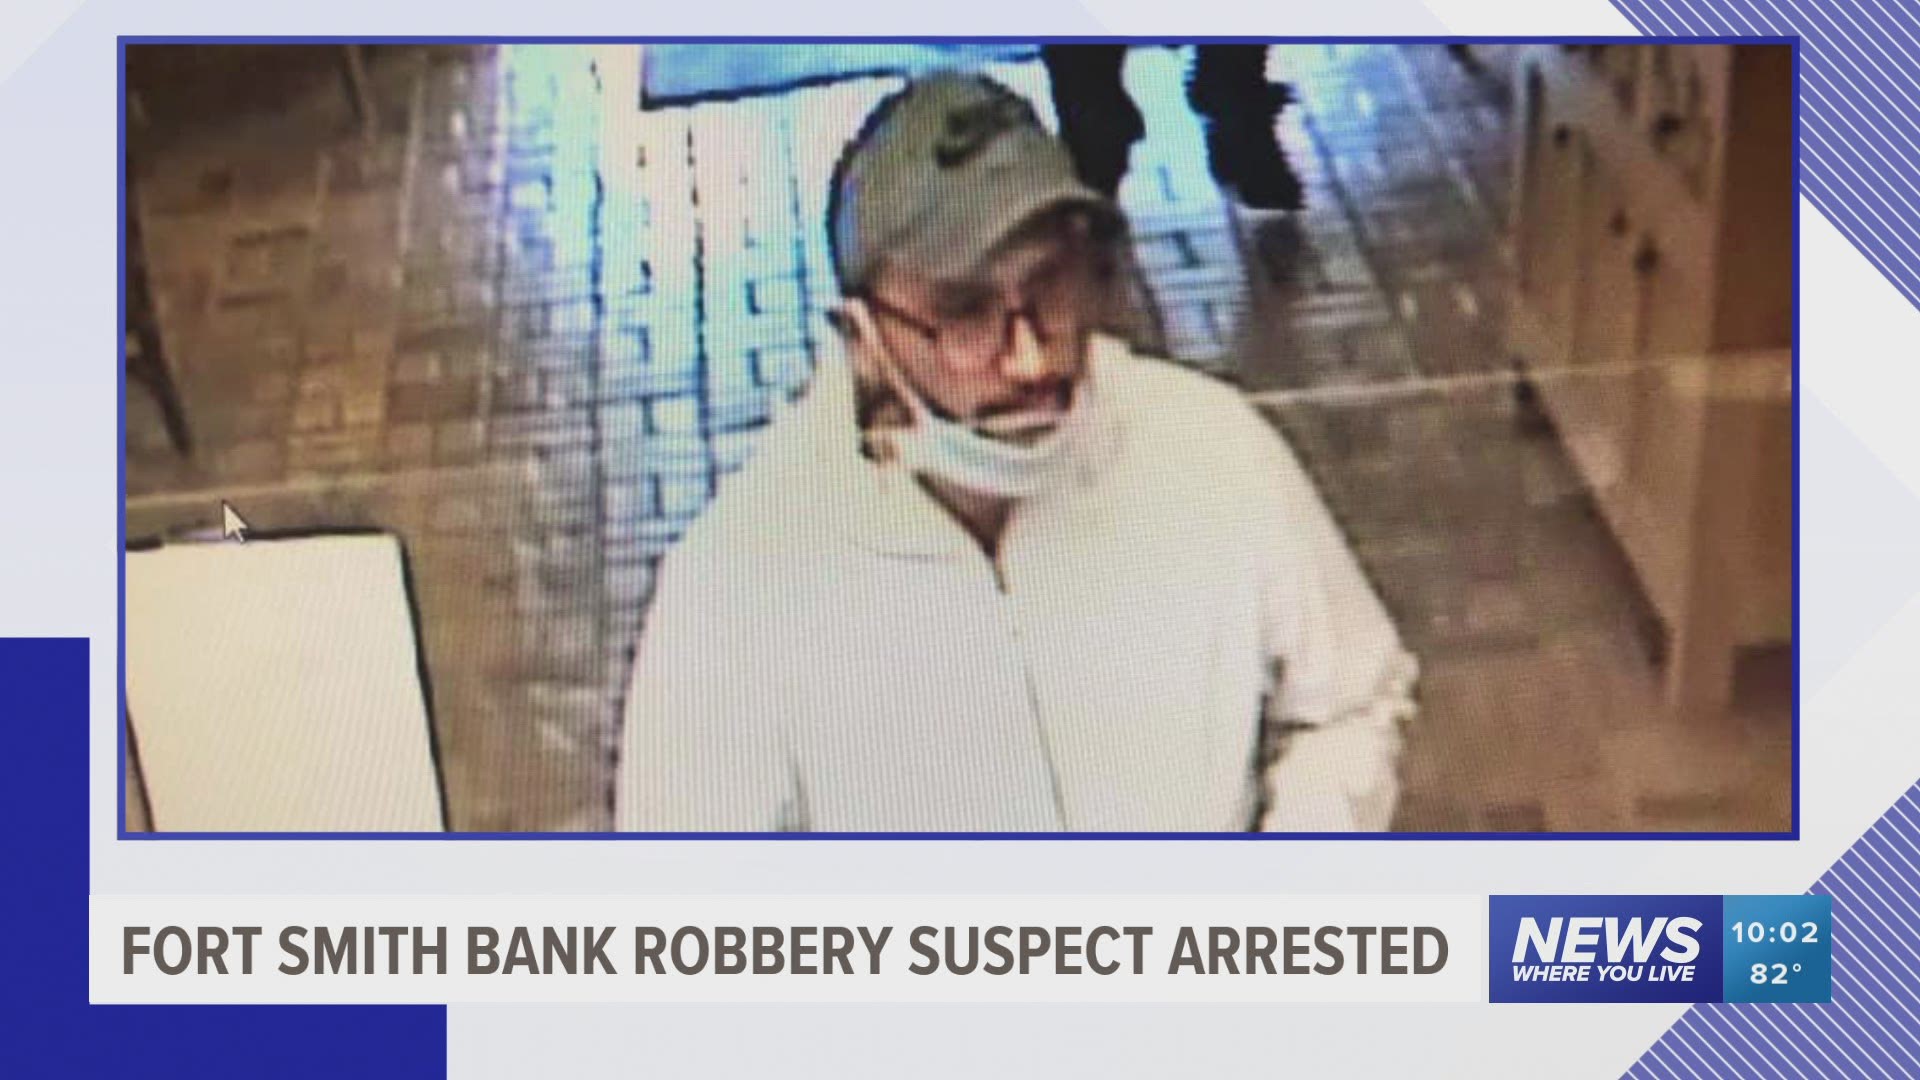 Fort Smith Bank Robbery Suspect Arrested